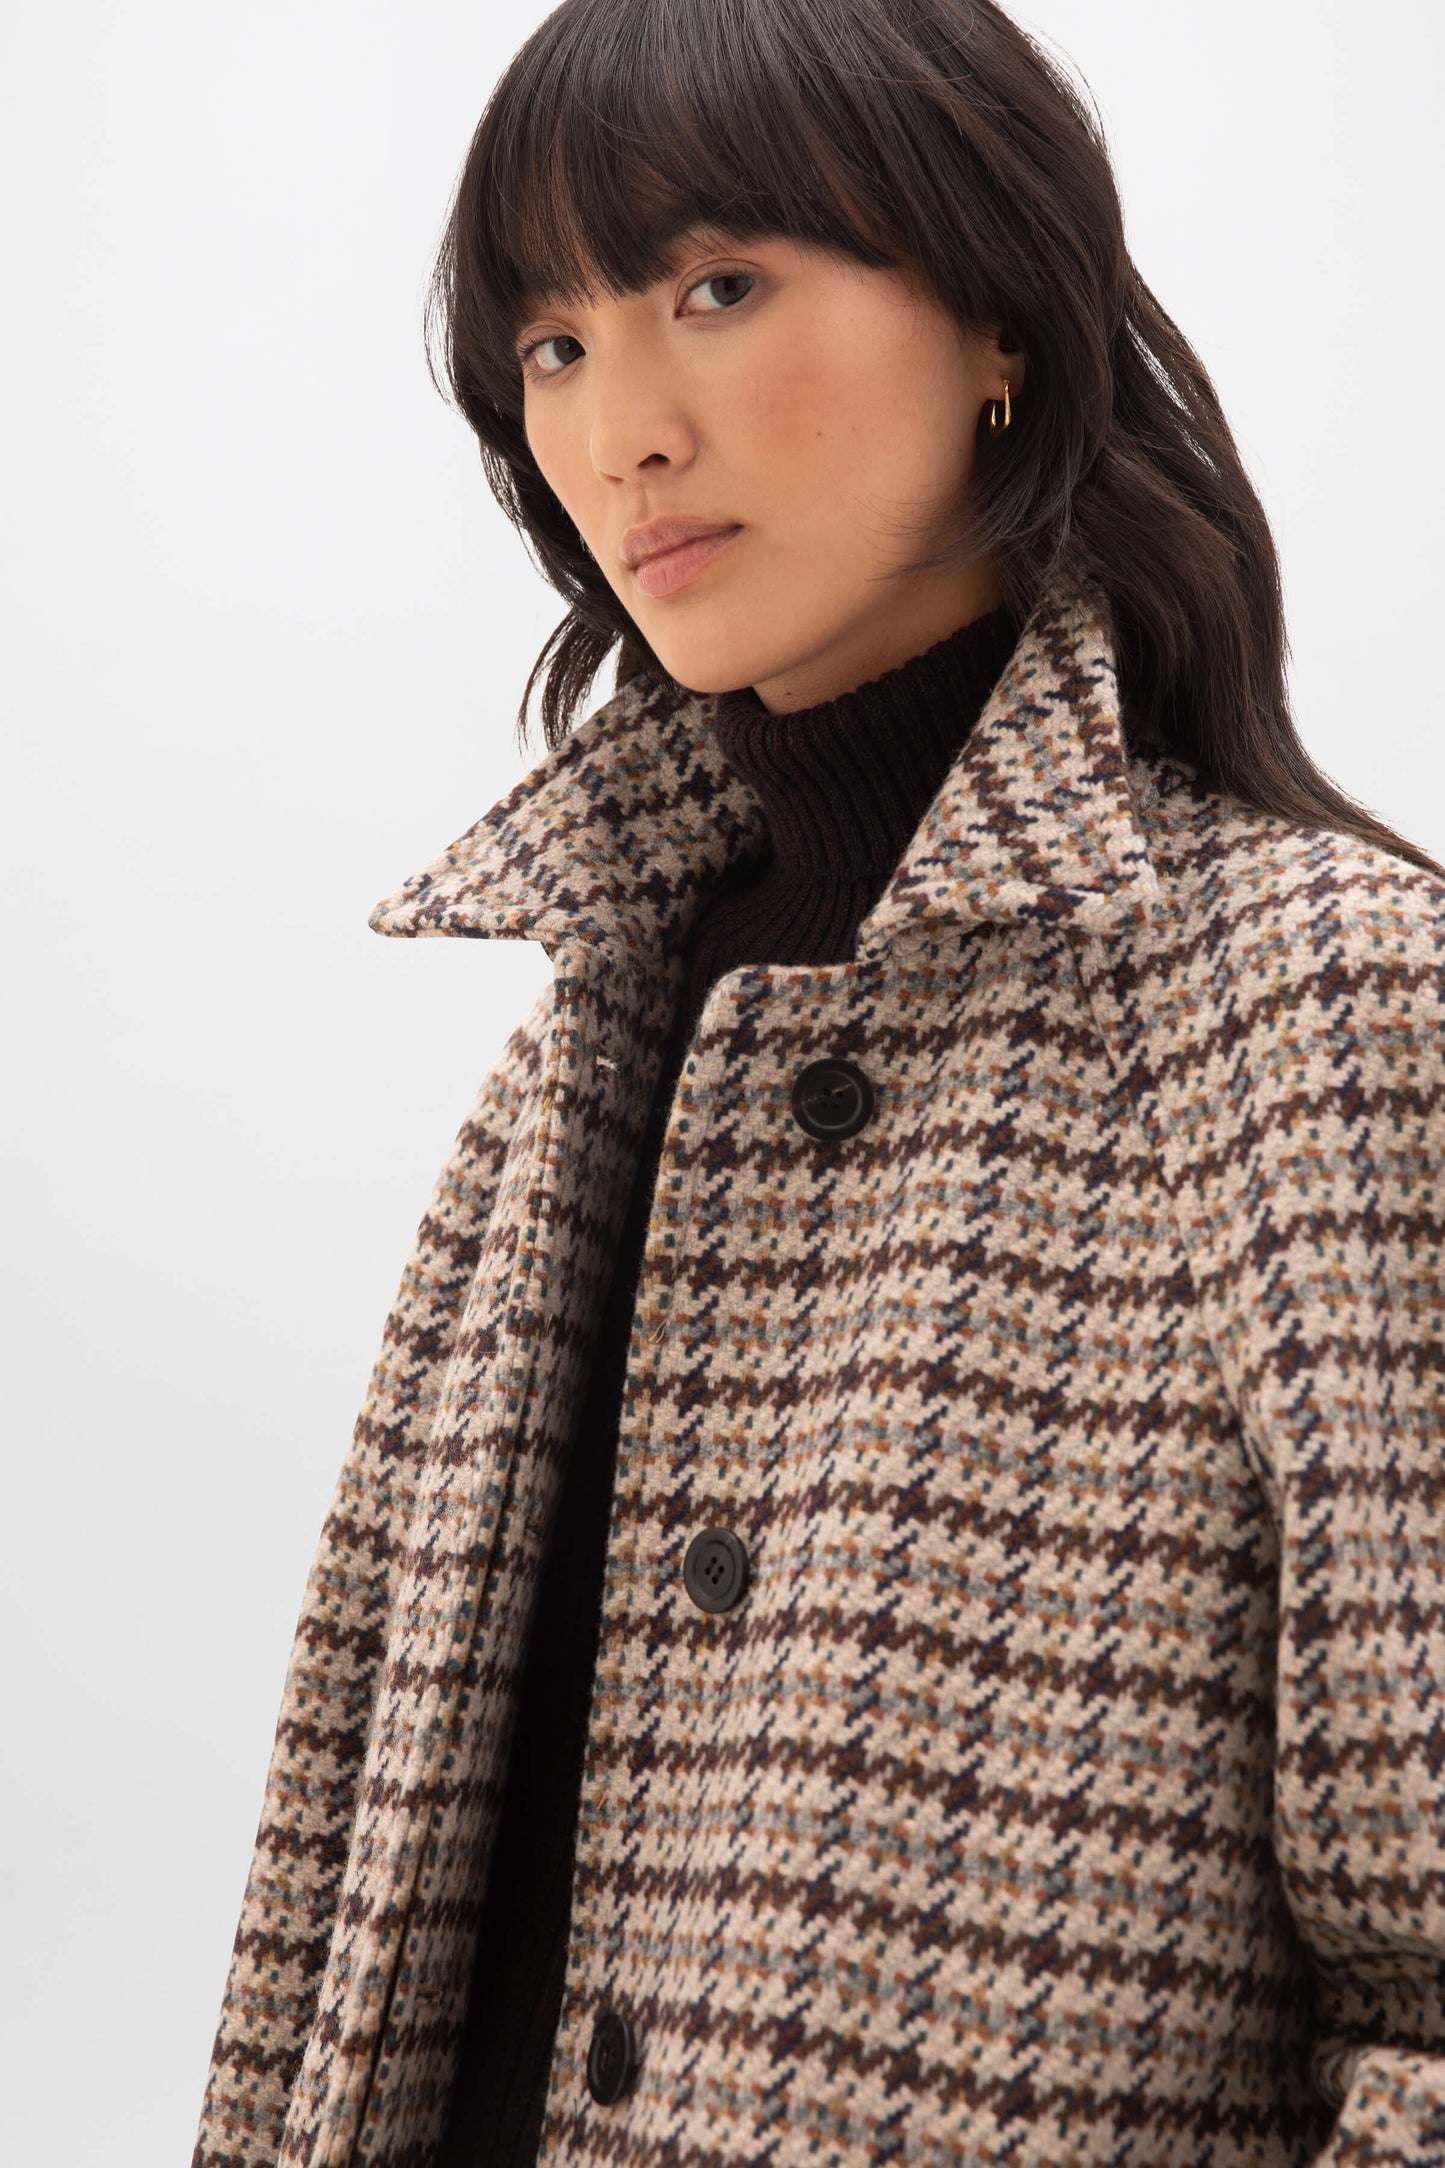 Johnstons of Elgin Women's Balmacaan Coat in Blonde Guarded Houndstooth on a white background TD000417RU7379